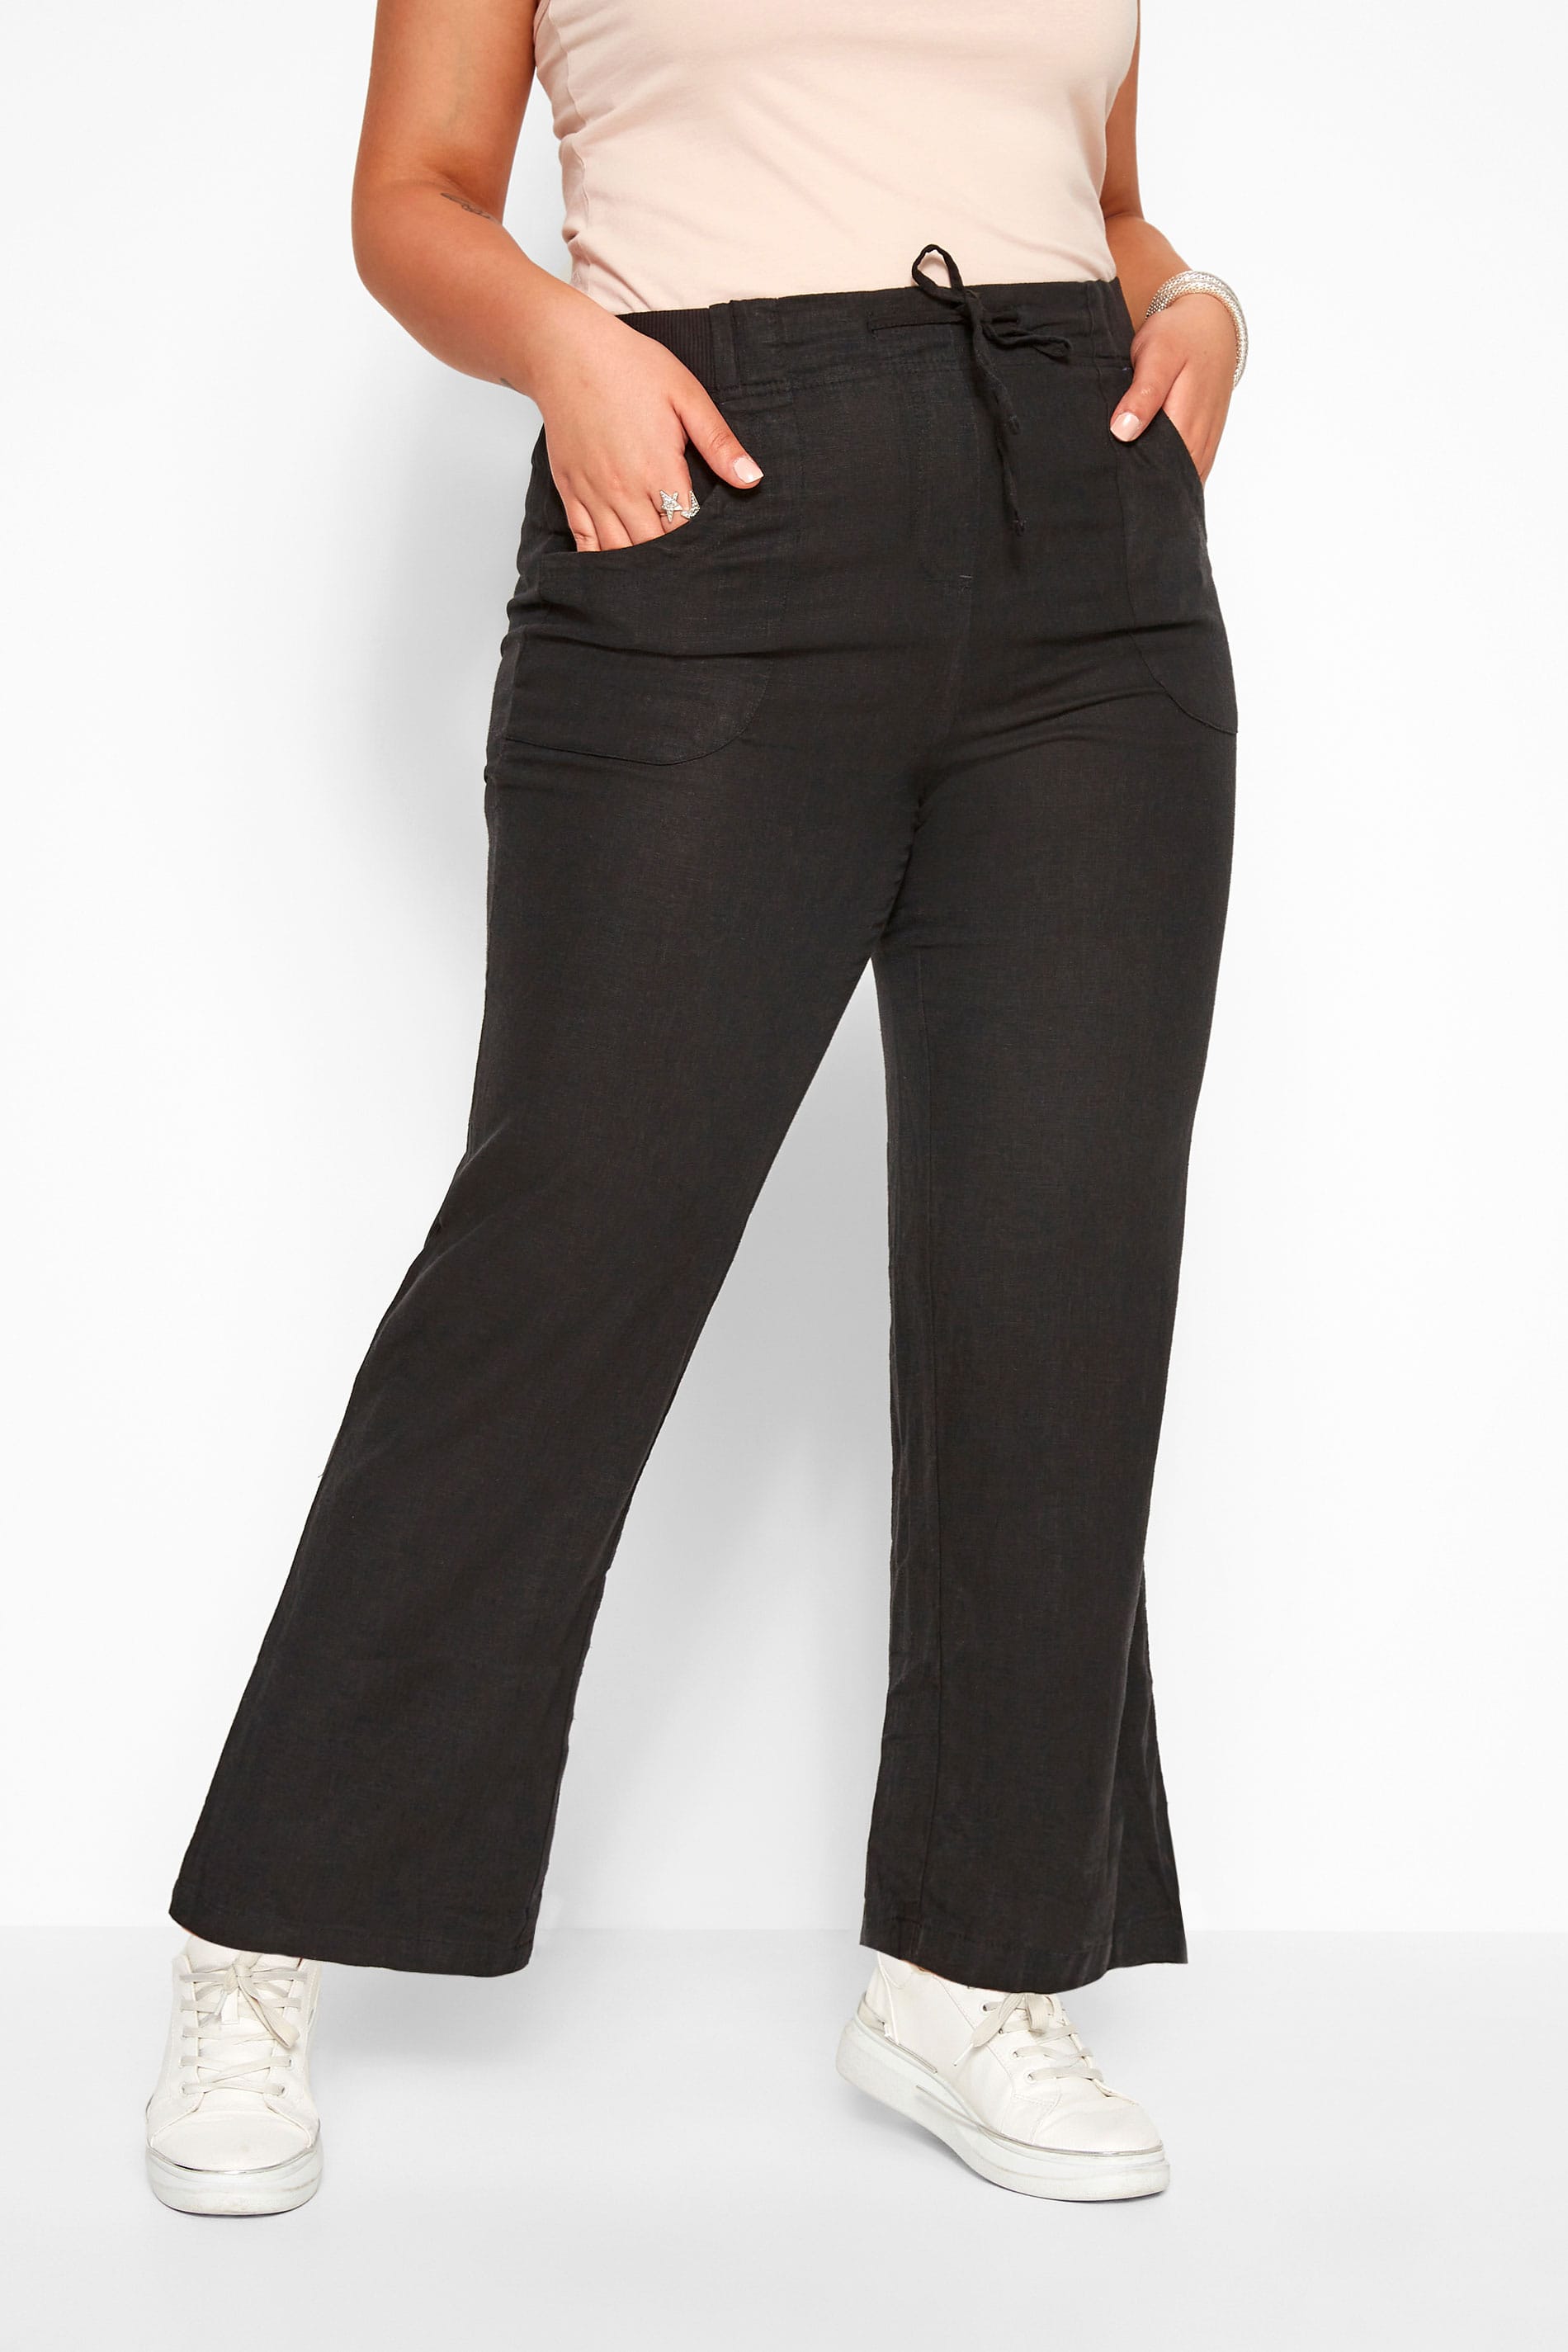 Black Linen Mix Wide Leg Trousers | Sizes 16 to 36 | Yours Clothing